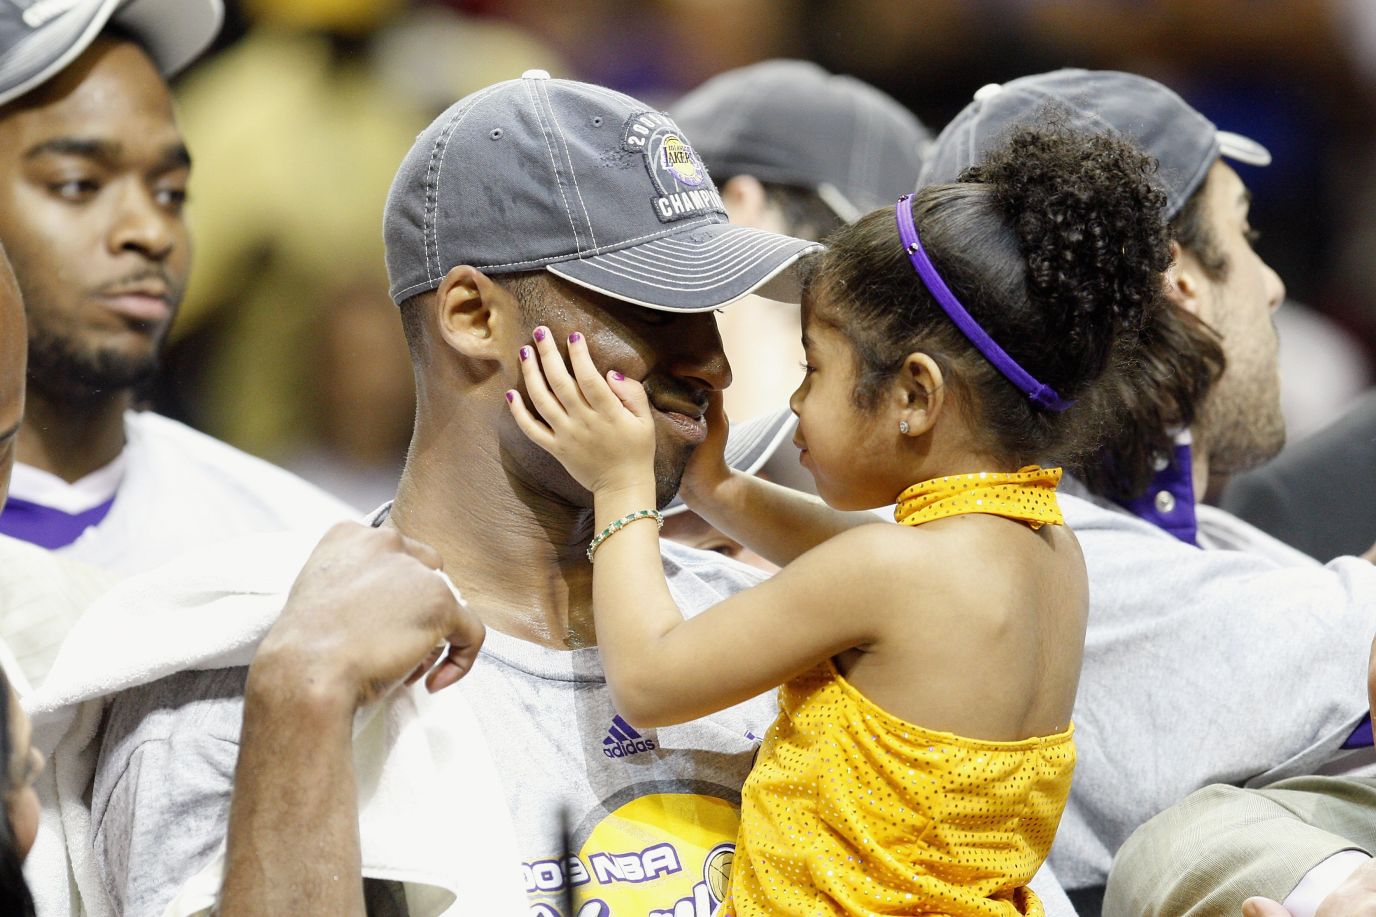 Remembering Kobe Bryant: NBA Stars On Their Most Memorable Moments With the Black Mamba